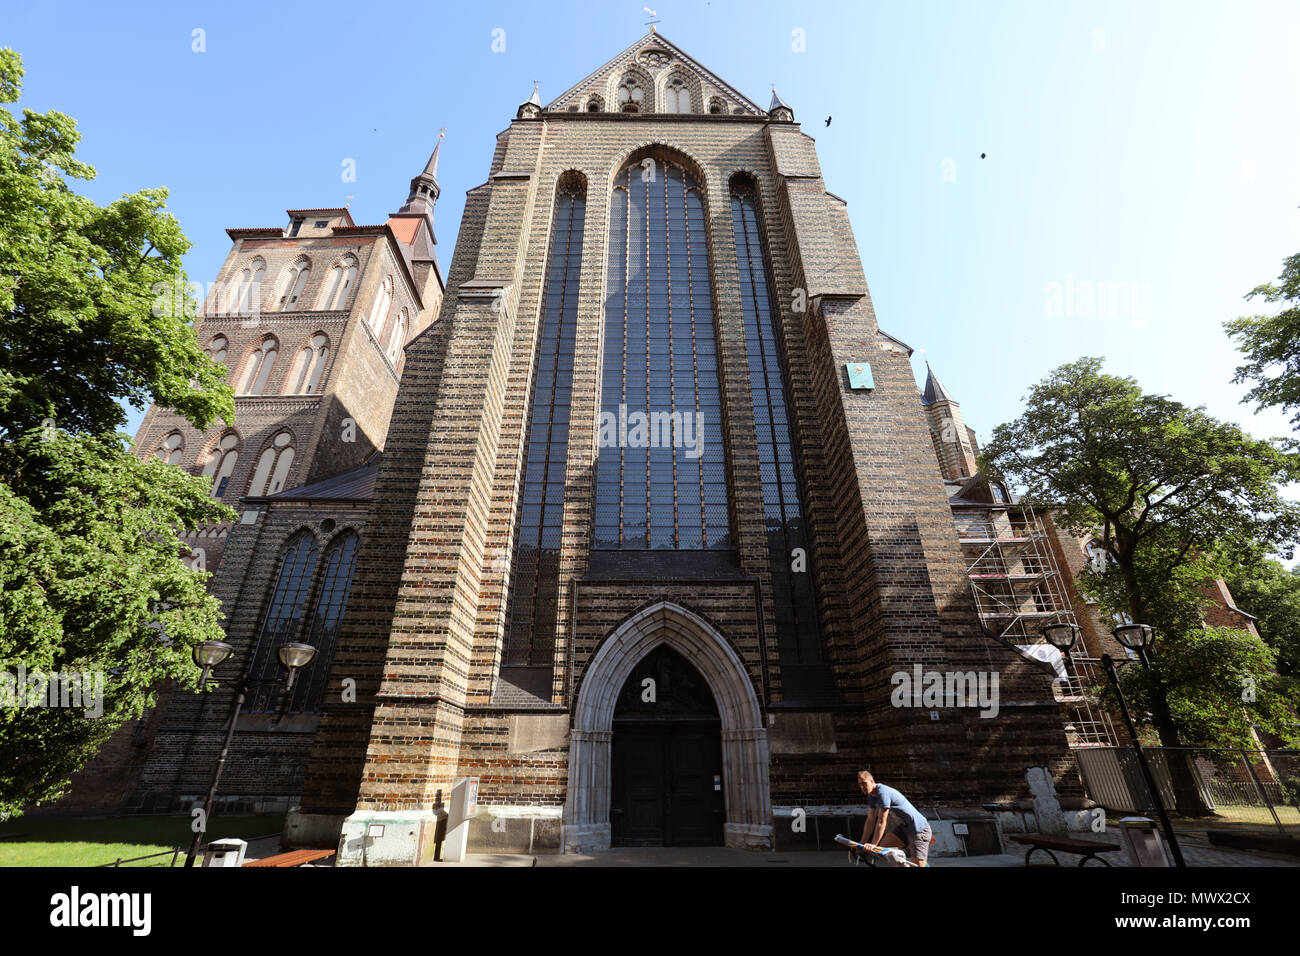 30 May 2018, Germany, Rostock: St. Mary's Church is a prominent example of the historic architecture of Rostock, a North German city celebrating its 800th anniversary this year. Photo: Bernd Wüstneck/dpa Stock Photo